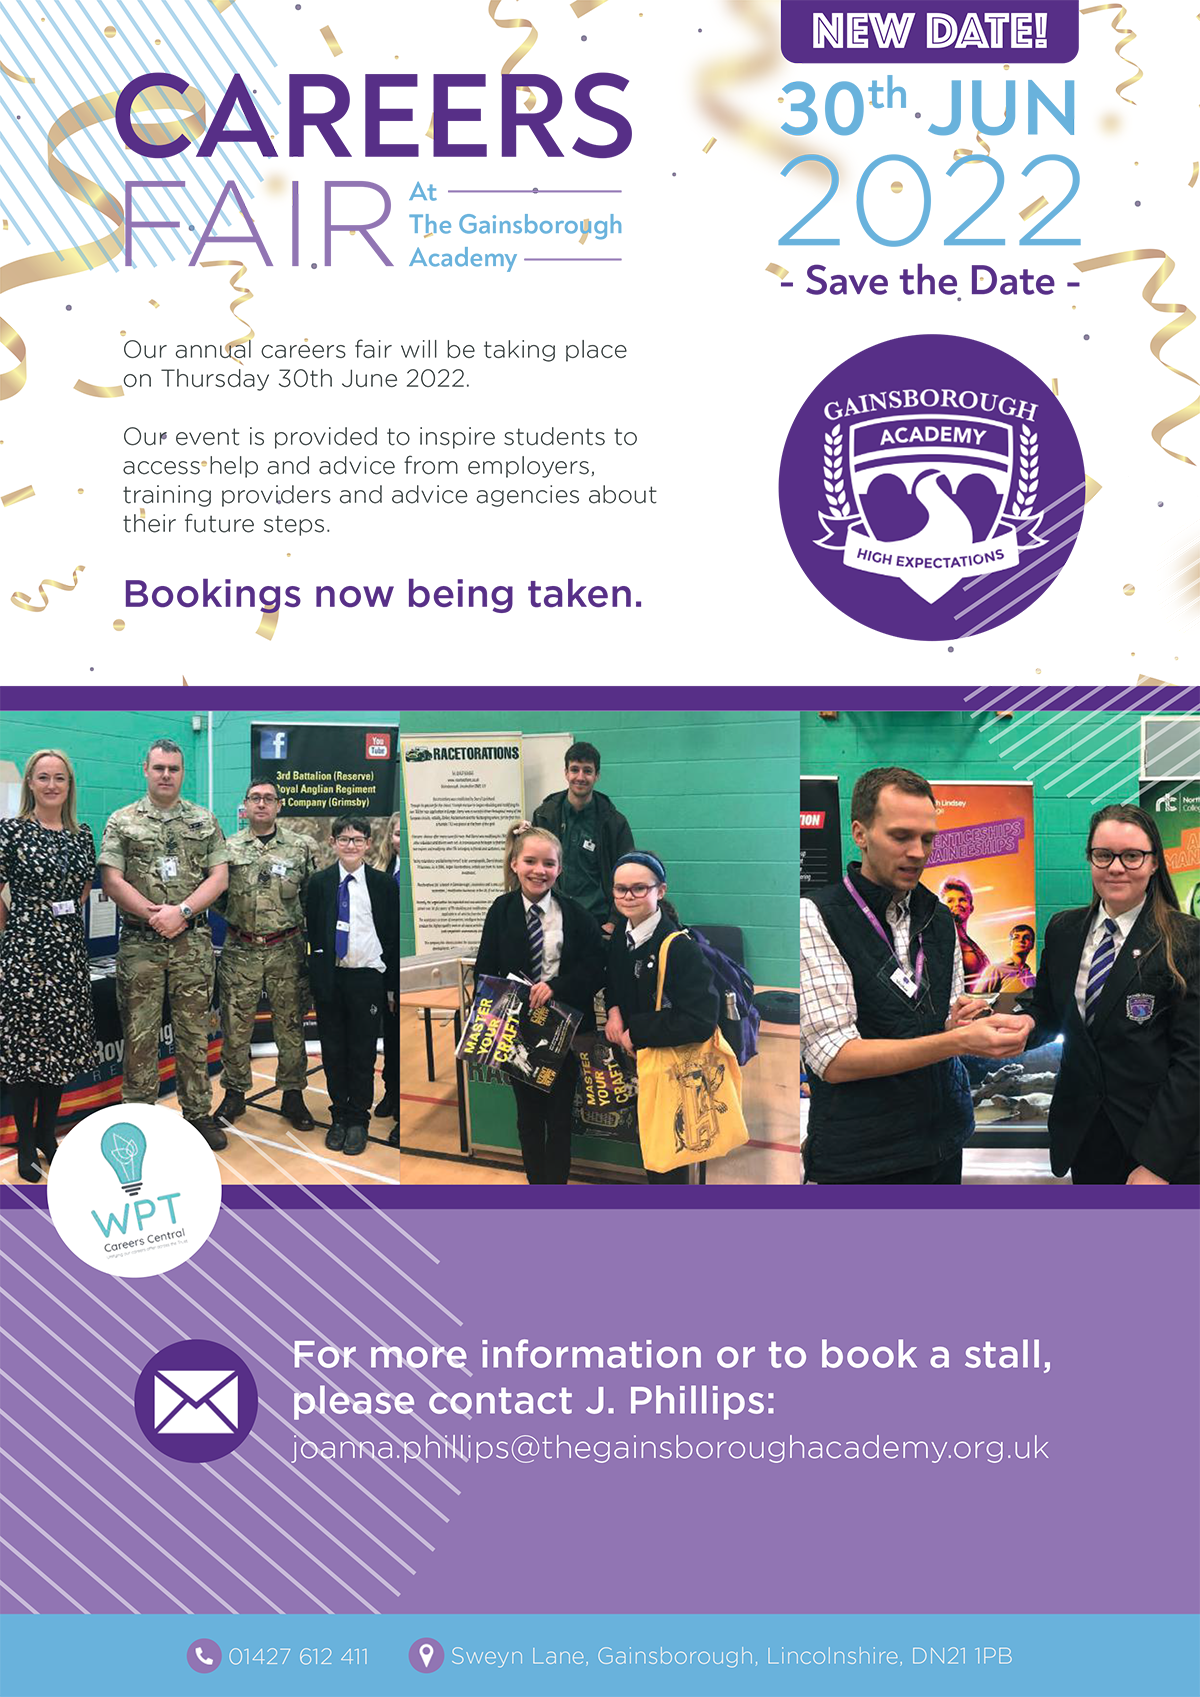 Flyer for Gainsborough Academy's Career Fair on 30th June 2022, with pictures of children in school uniform interacting with organisers exhibiting, and information about the event.